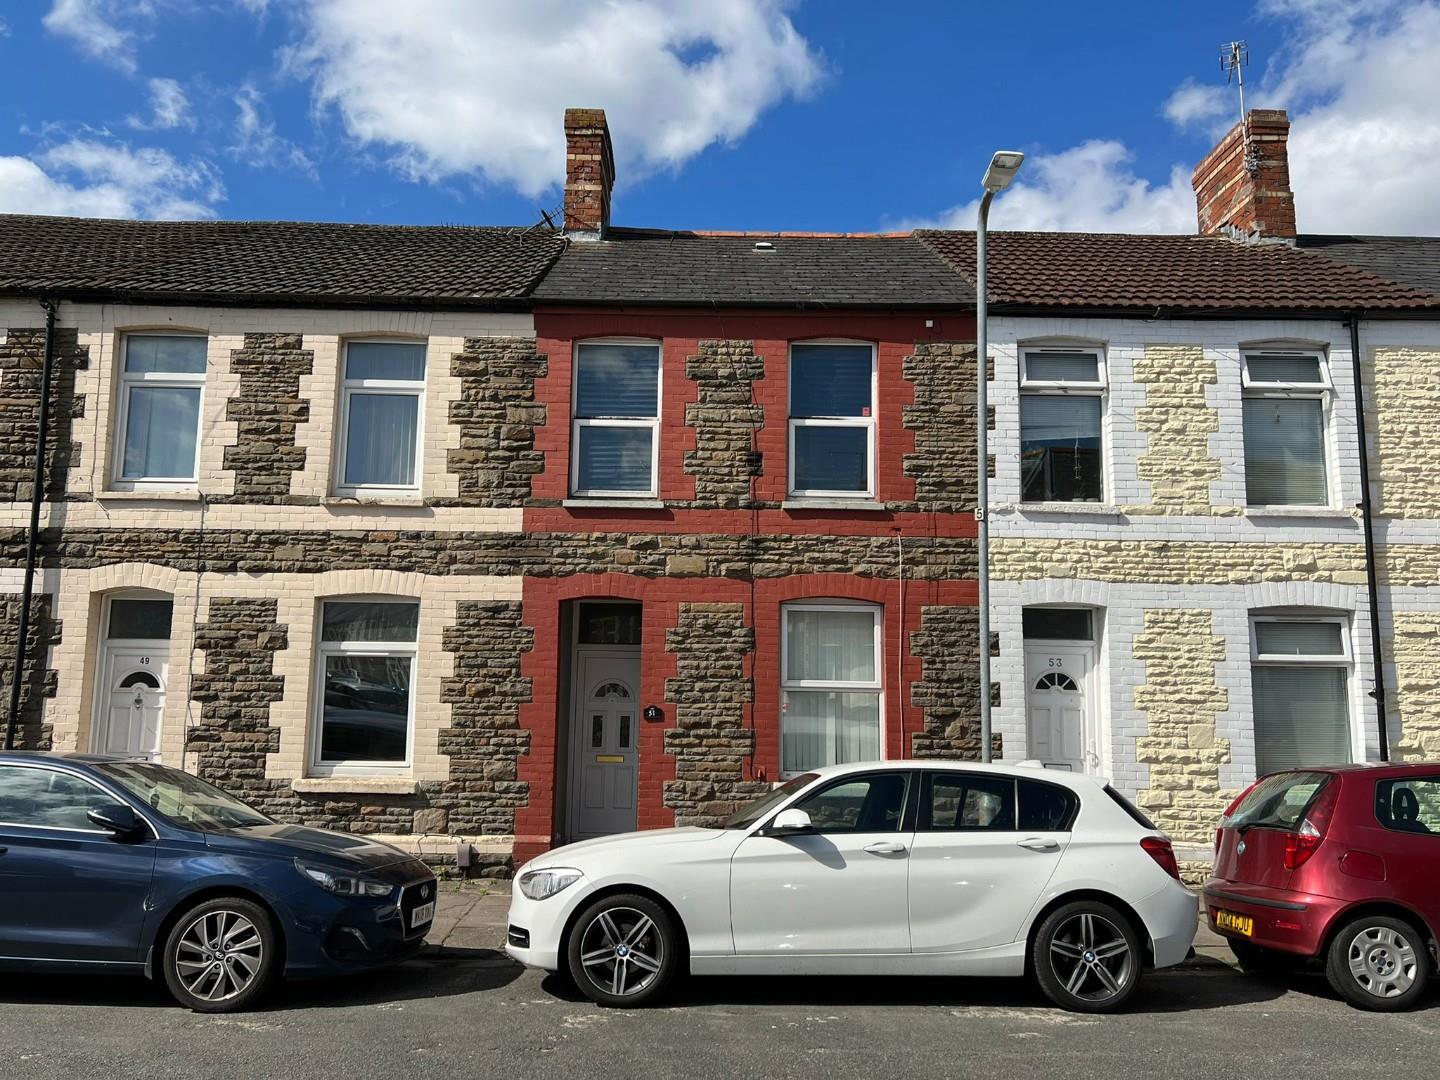 3 bed  for sale in Merthyr Street, Cardiff, CF24